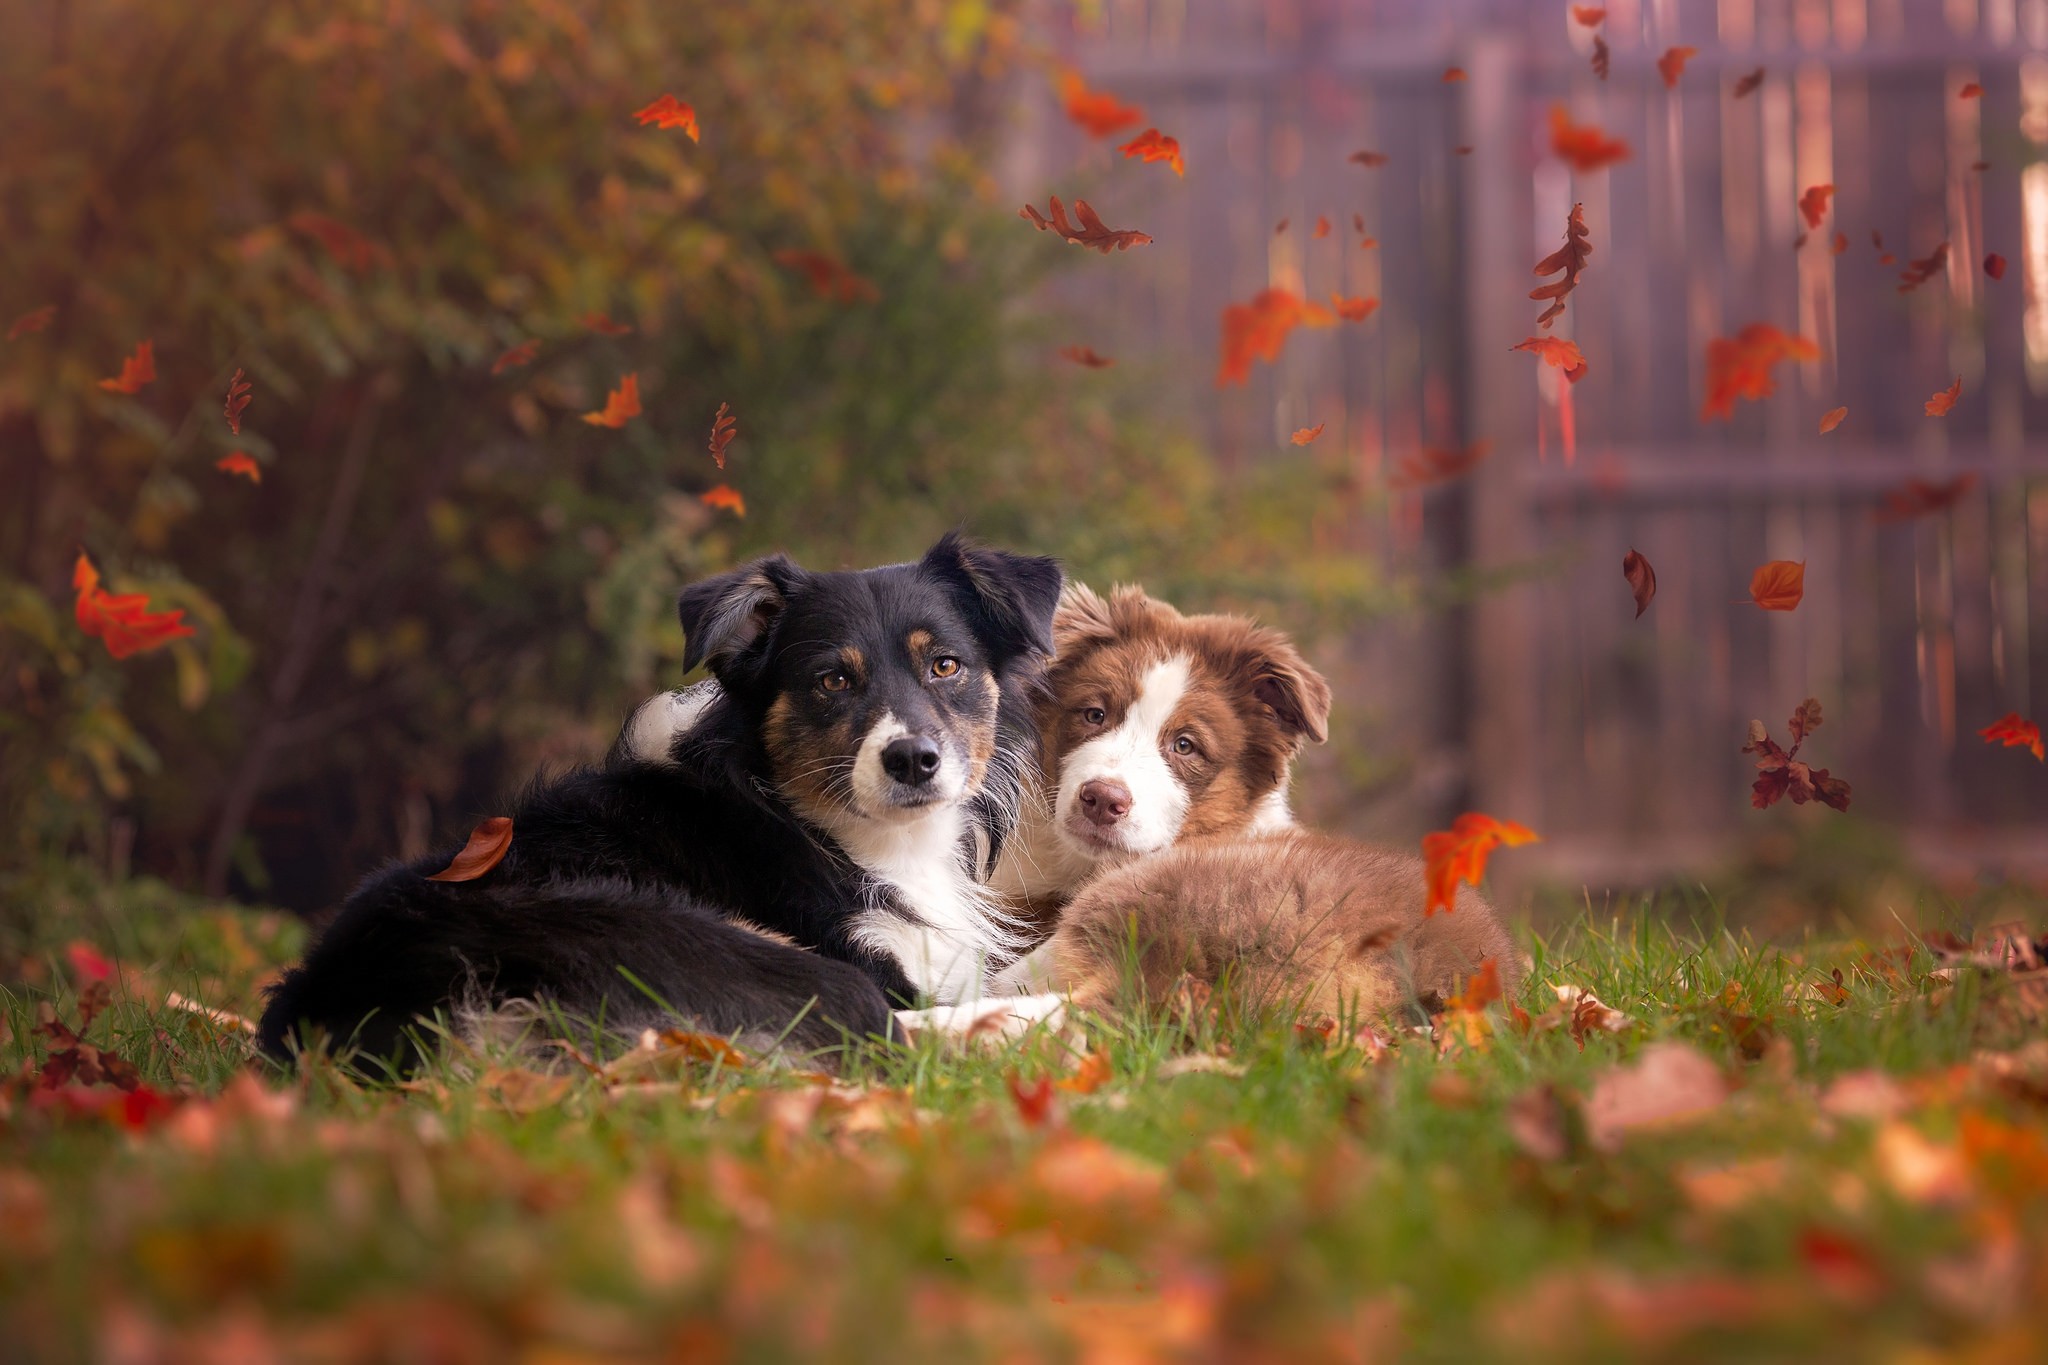 General 2048x1365 animals fall leaves dog outdoors grass